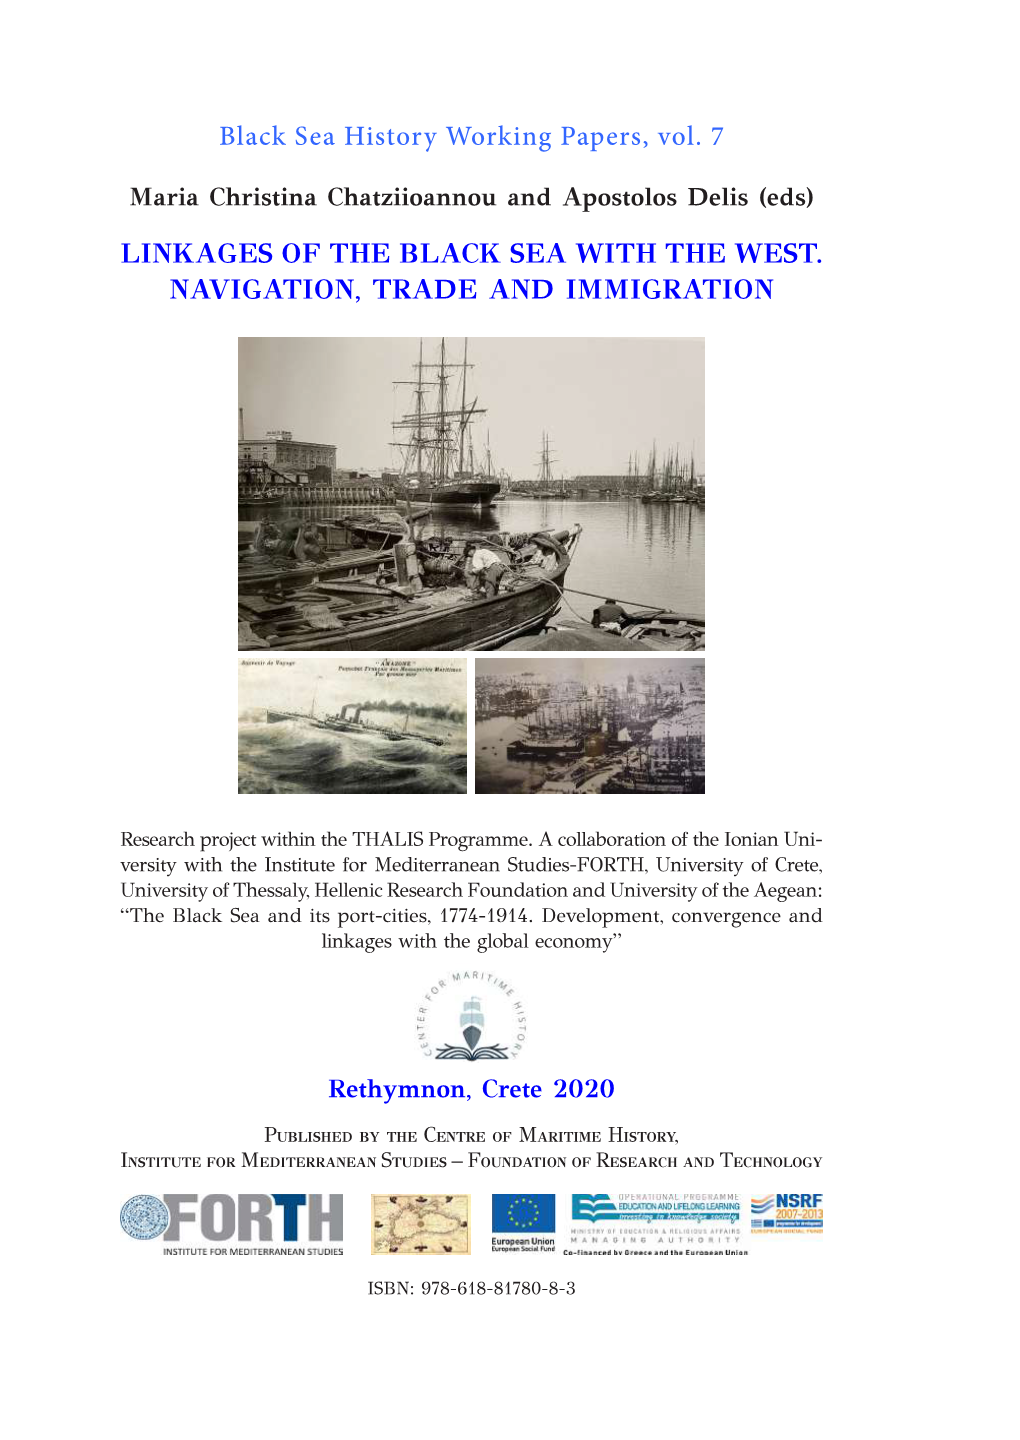 LINKAGES of the BLACK SEA with the WEST. NAVIGATION, TRADE and IMMIGRATION Black Sea History Working Papers, Vol. 7